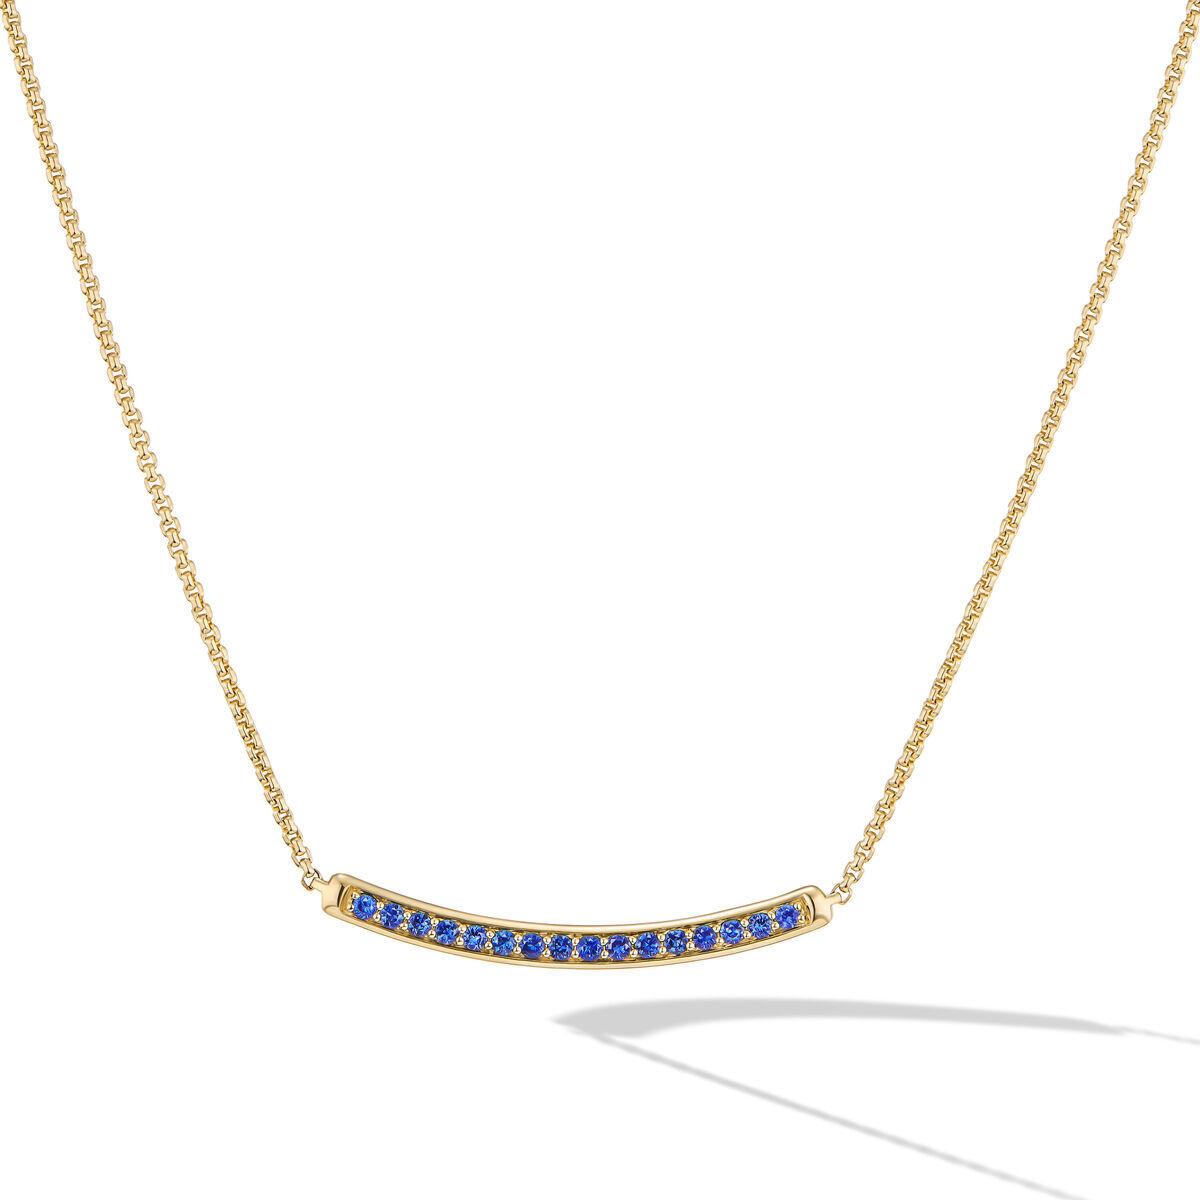 David Yurman Petite Pavé Bar Necklace in 18K Yellow Gold with Blue Sapphires 0